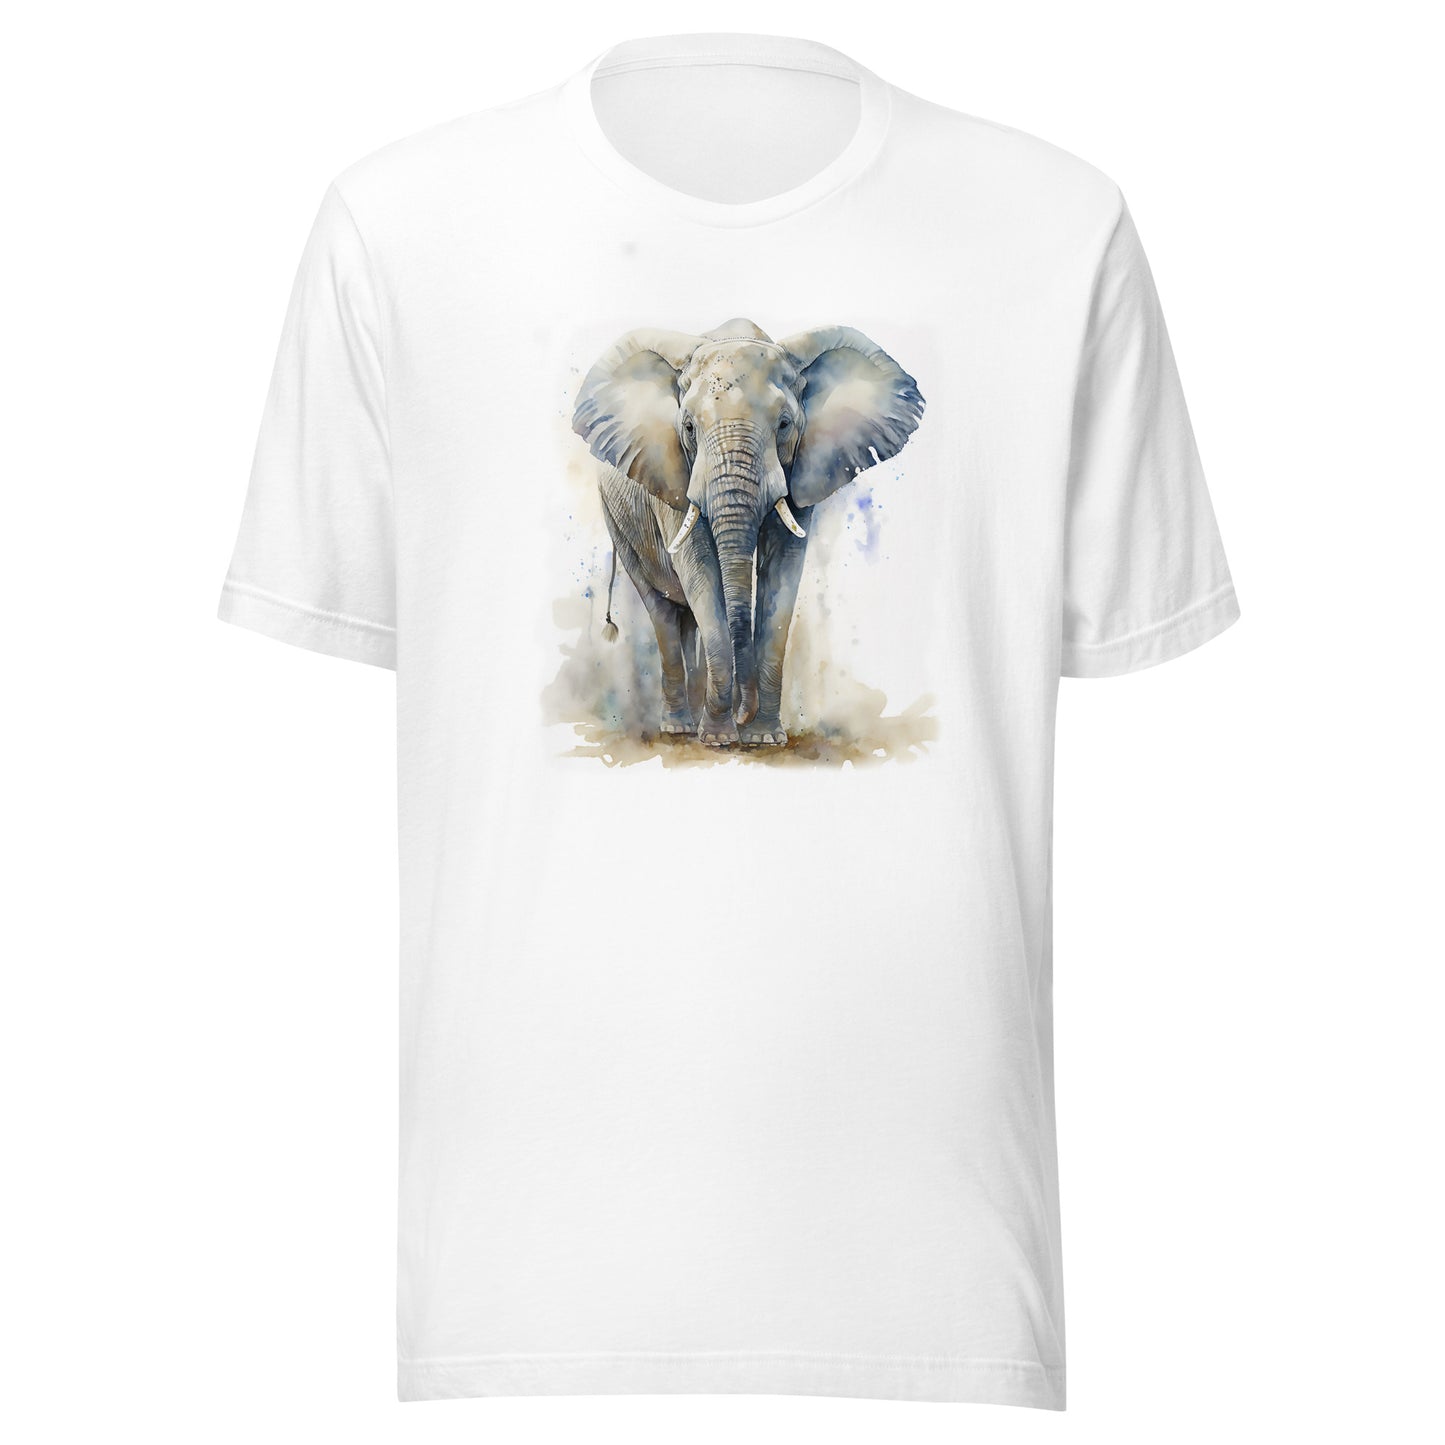 Women and Men's (Unisex) T-Shirt printed with an Elephant Bull